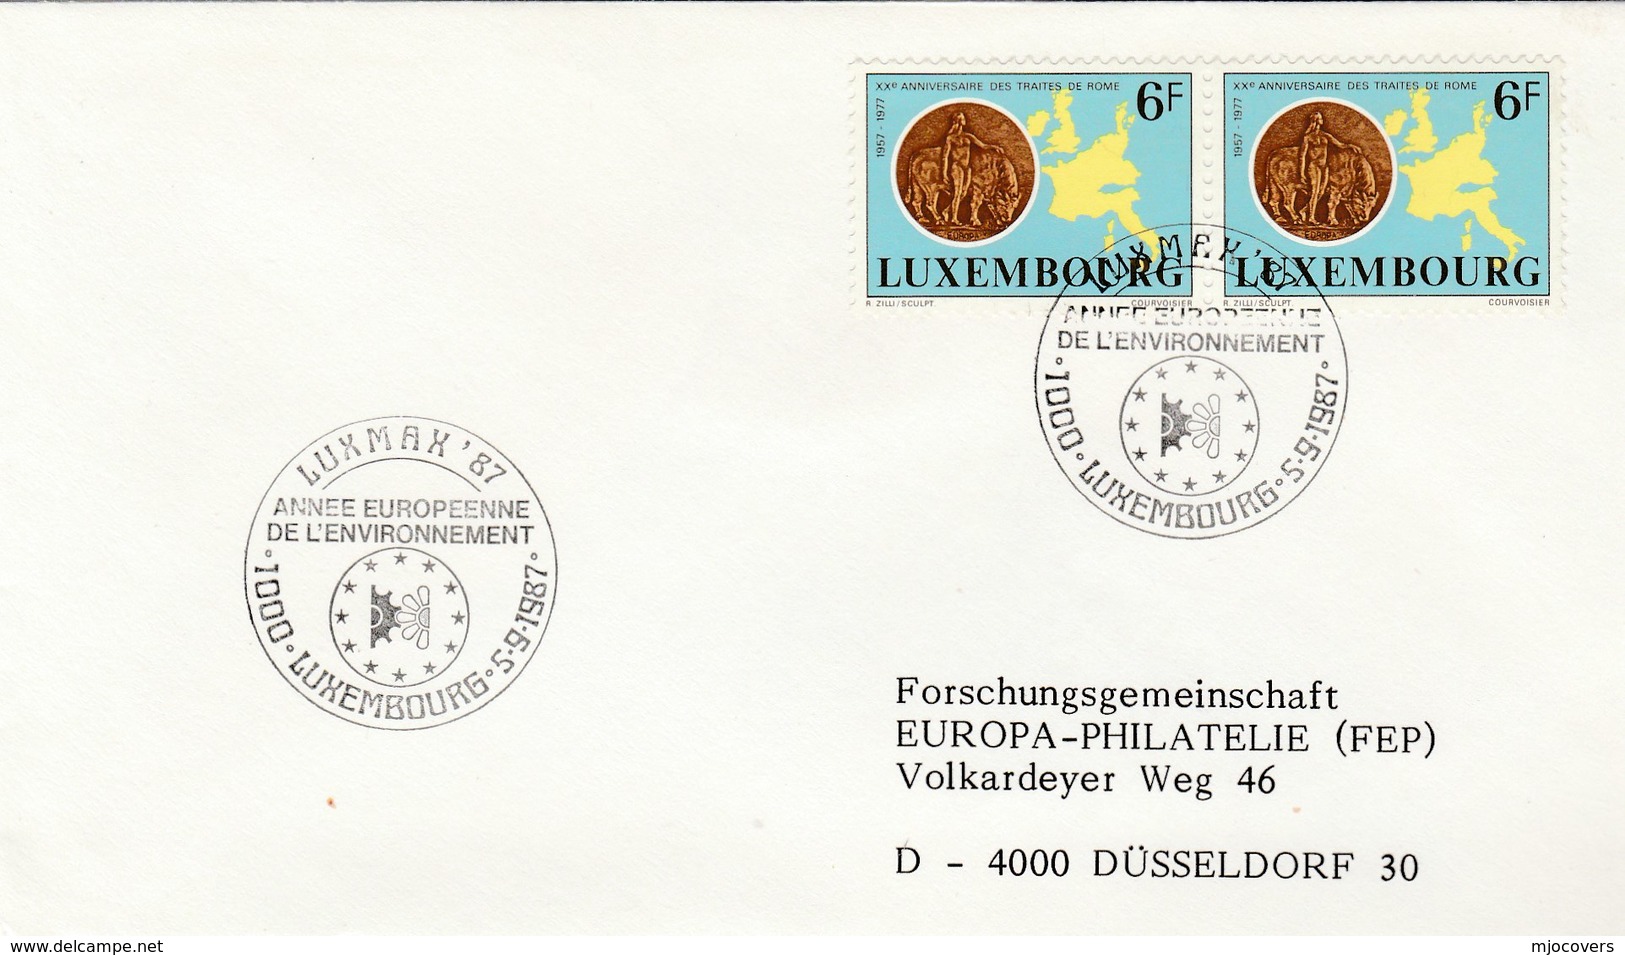 1987 LUXEMBOURG European ENVIRONMENT YEAR EVENT COVER Franked 2x TREATY OF ROME Stamps European Community Map - Briefe U. Dokumente